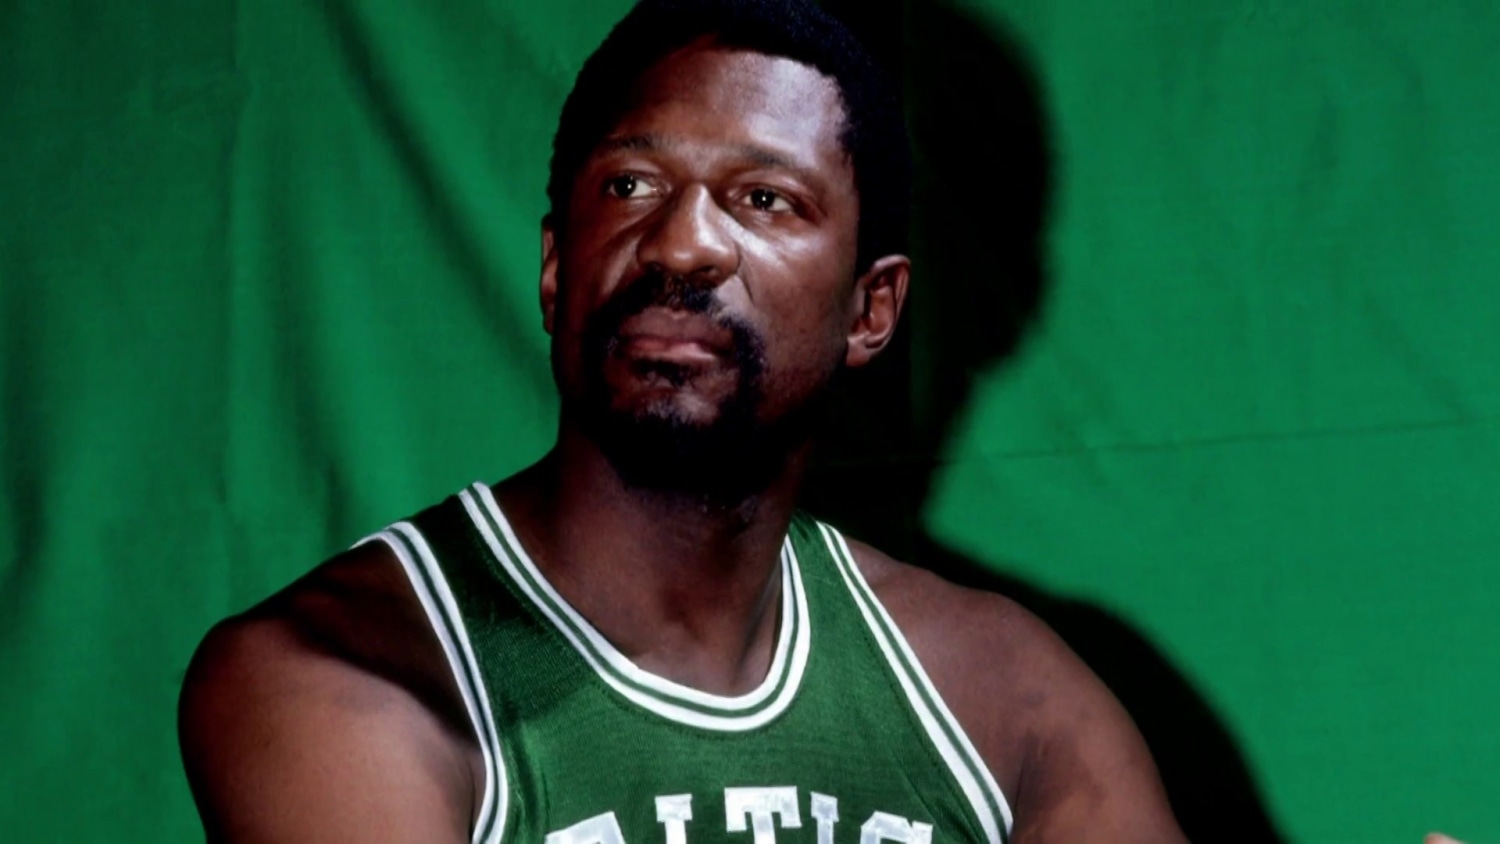 NBA players who currently wear untouchable Bill Russell's No. 6